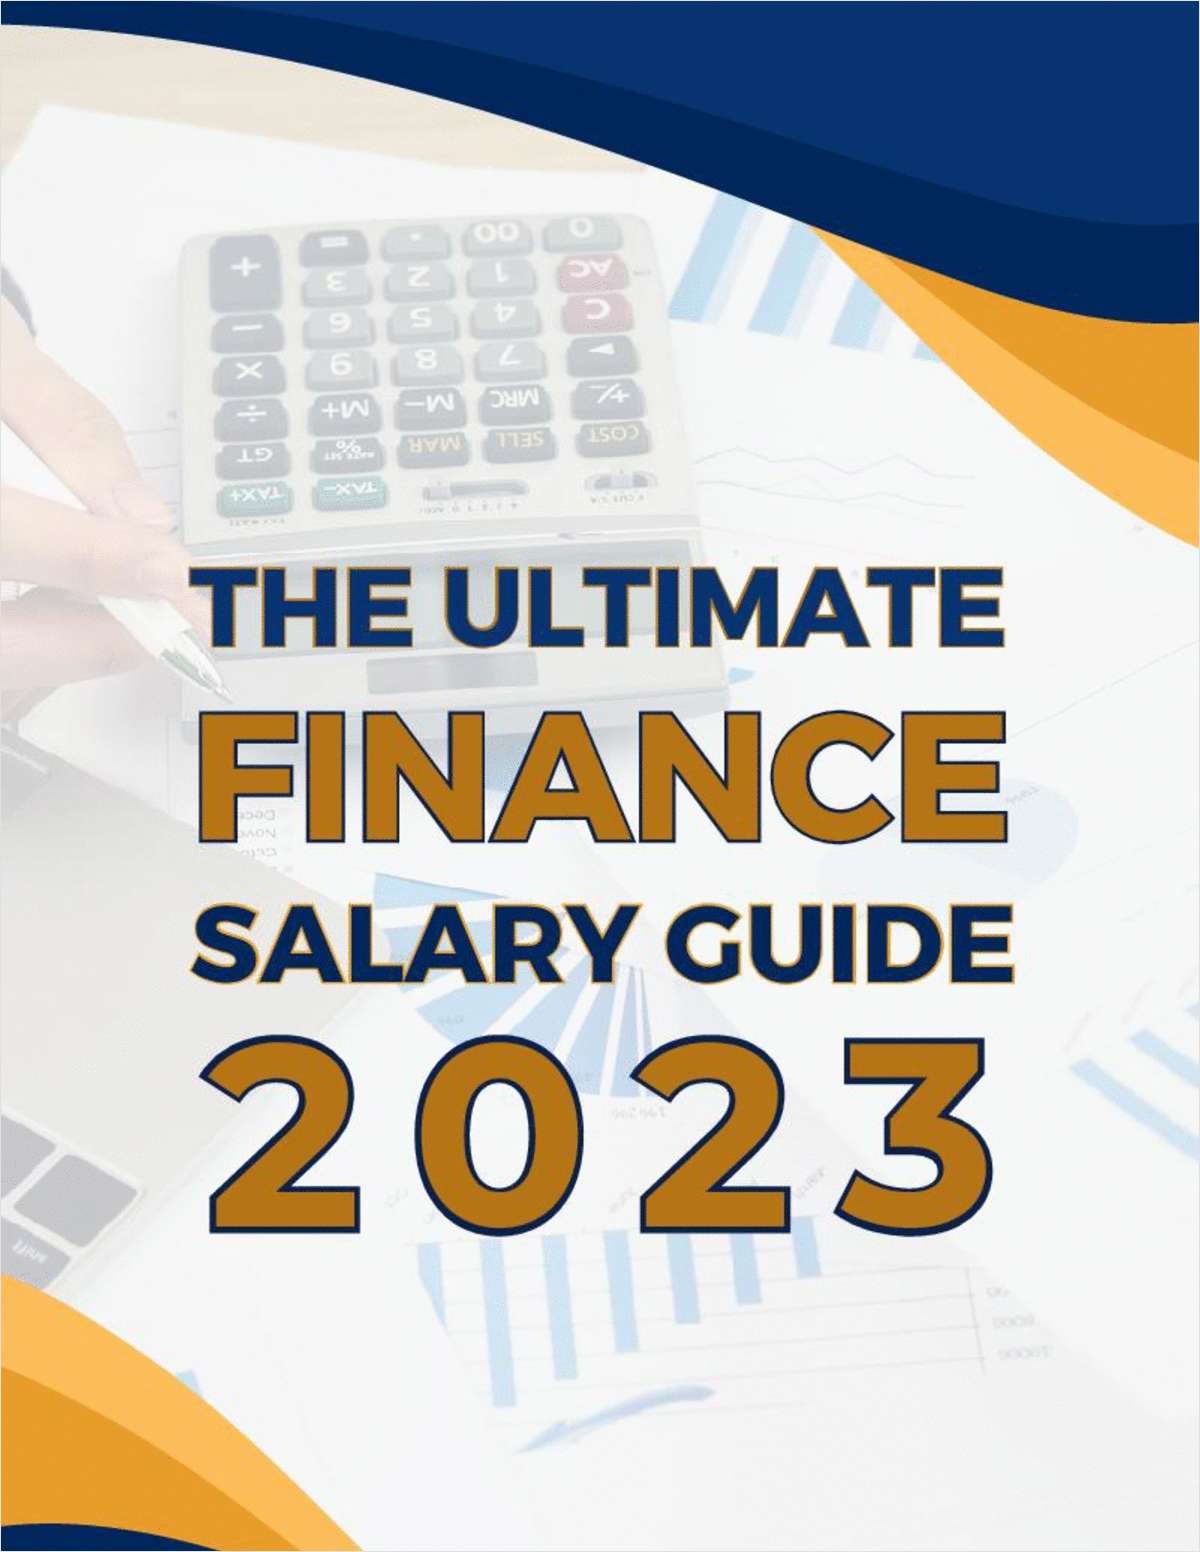 The Ultimate Finance Salary Guide 2023